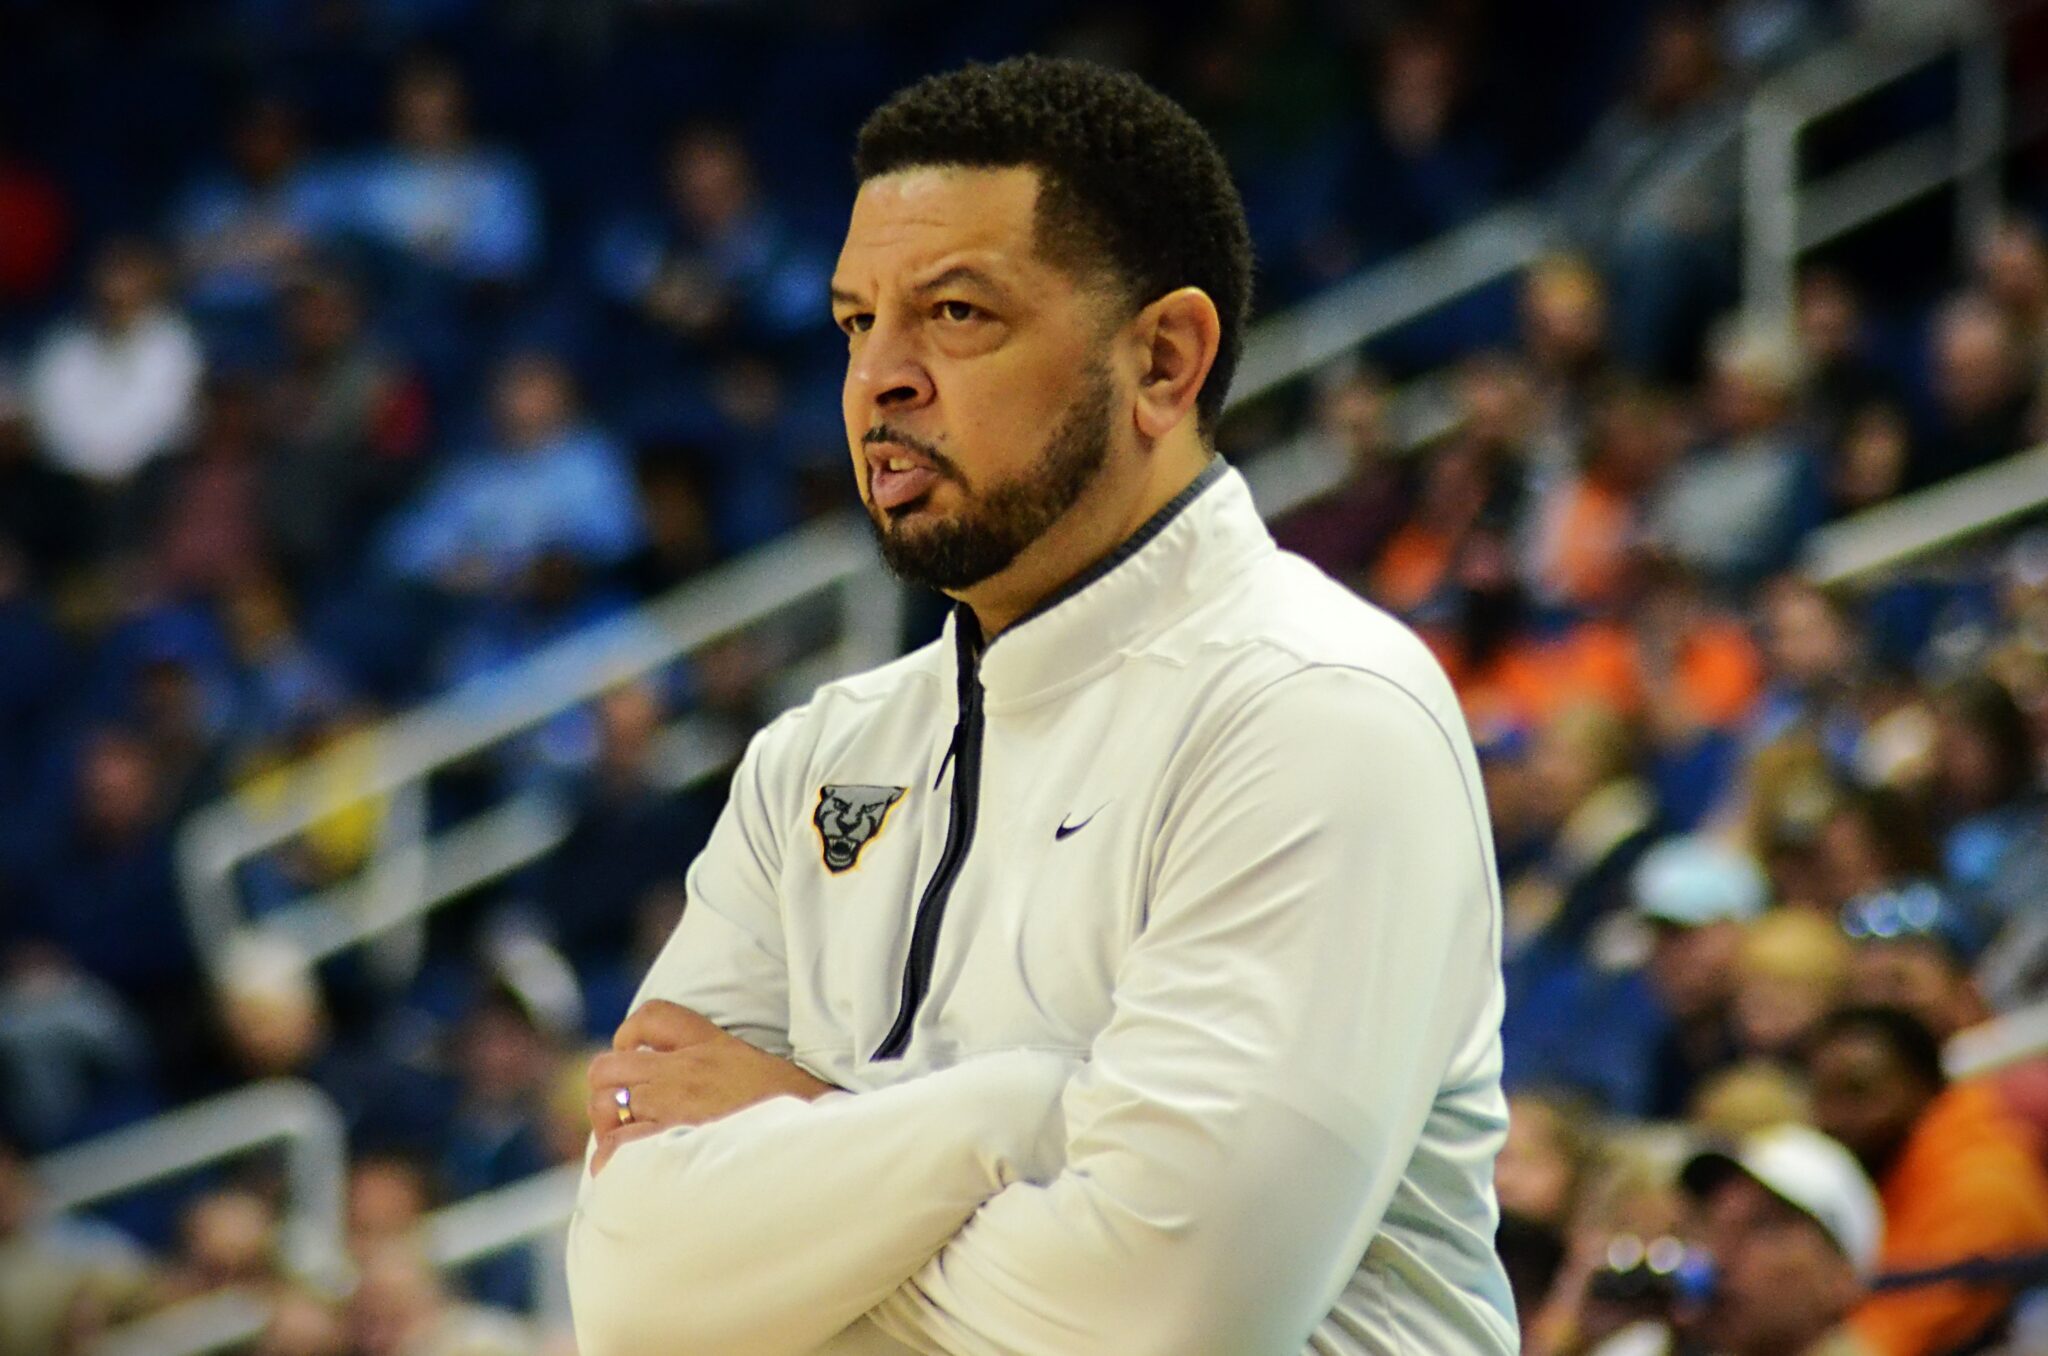 Jeff Capel watches during Pitt's ACC Tournament game vs. Georgia Tech in Greensboro, N.C. on March 8, 2023. (Mitchell Northam / Pittsburgh Sports Now)